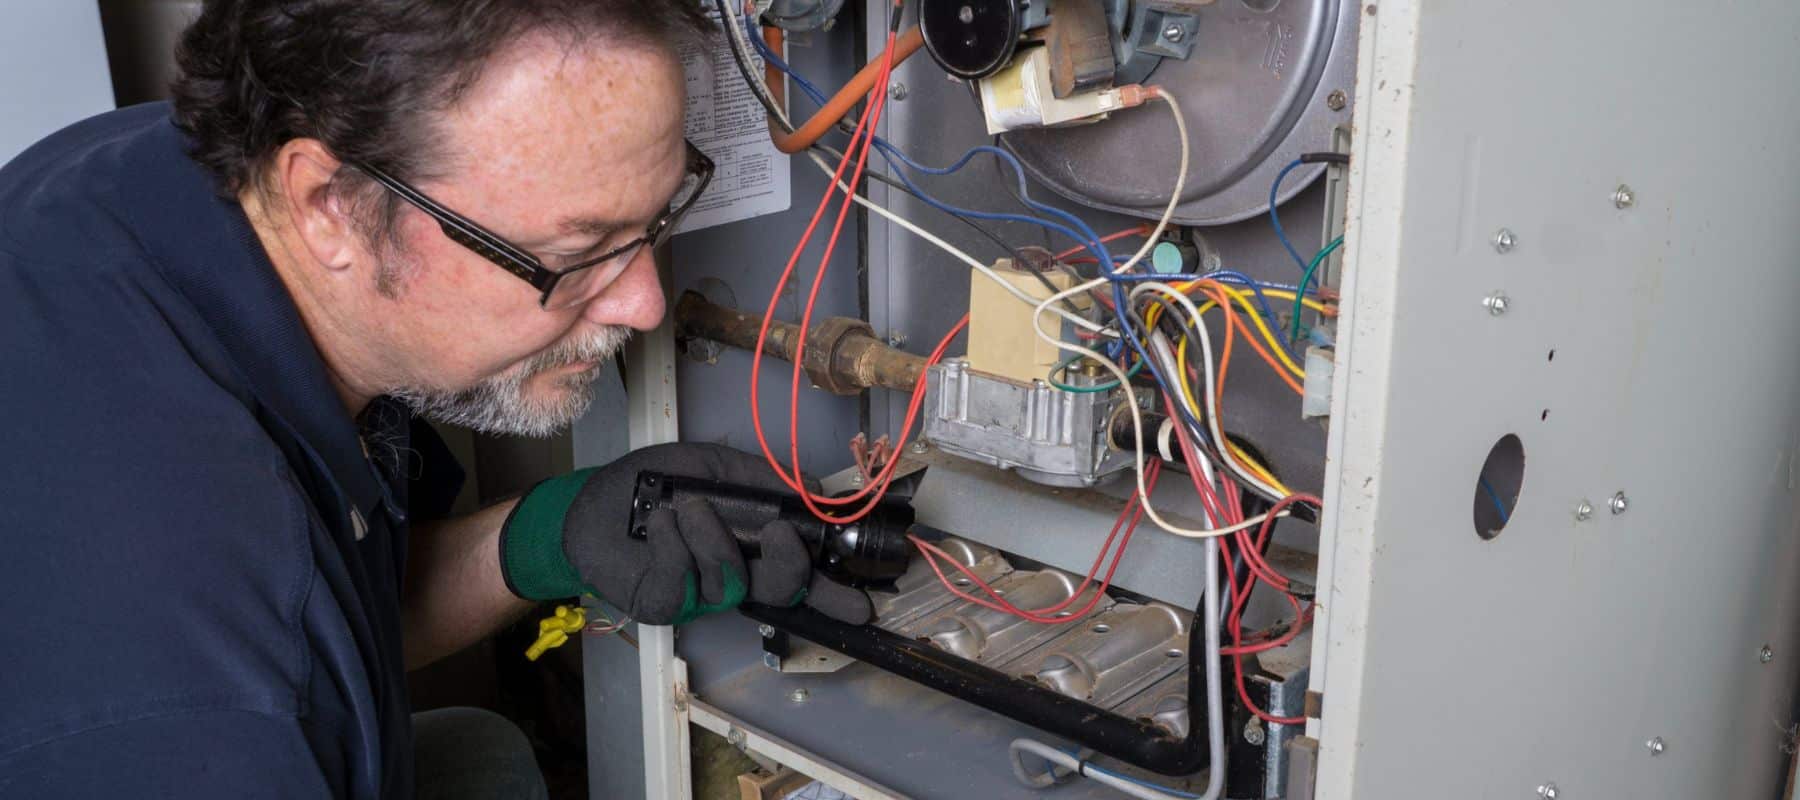 hvac technician using a flashlight to look inside a furnace to perform repairs